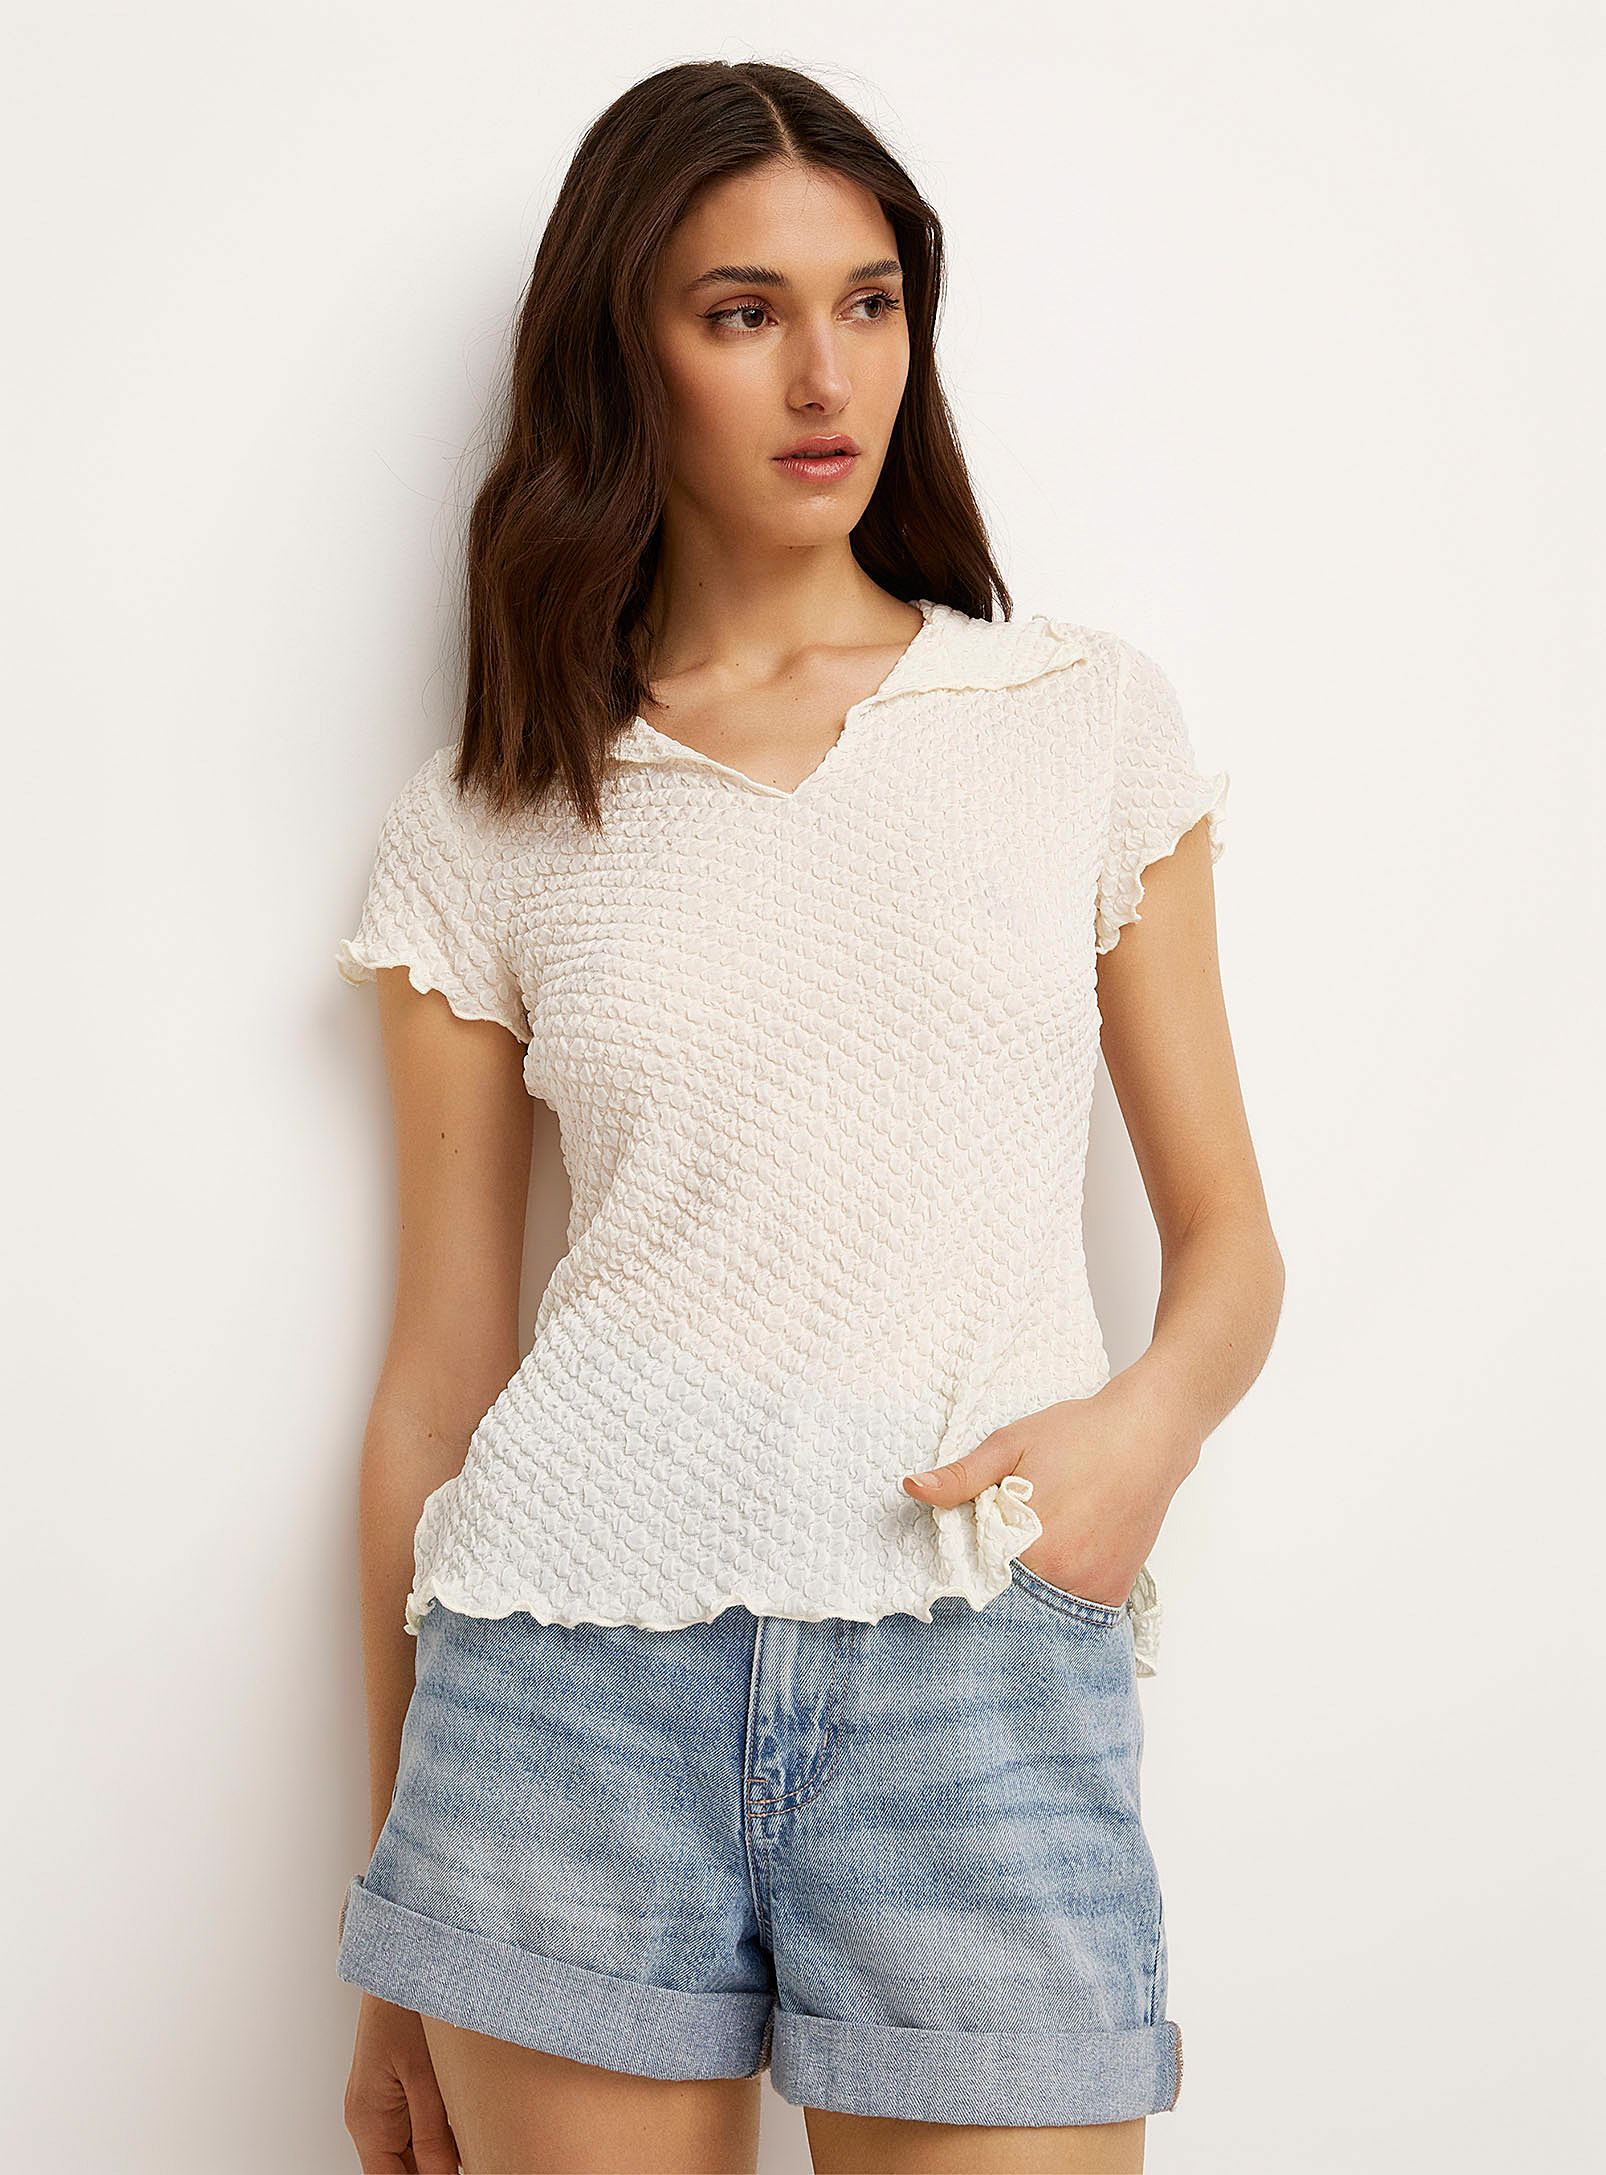 Icone Polo Collar Popcorn T-shirt In Ivory White